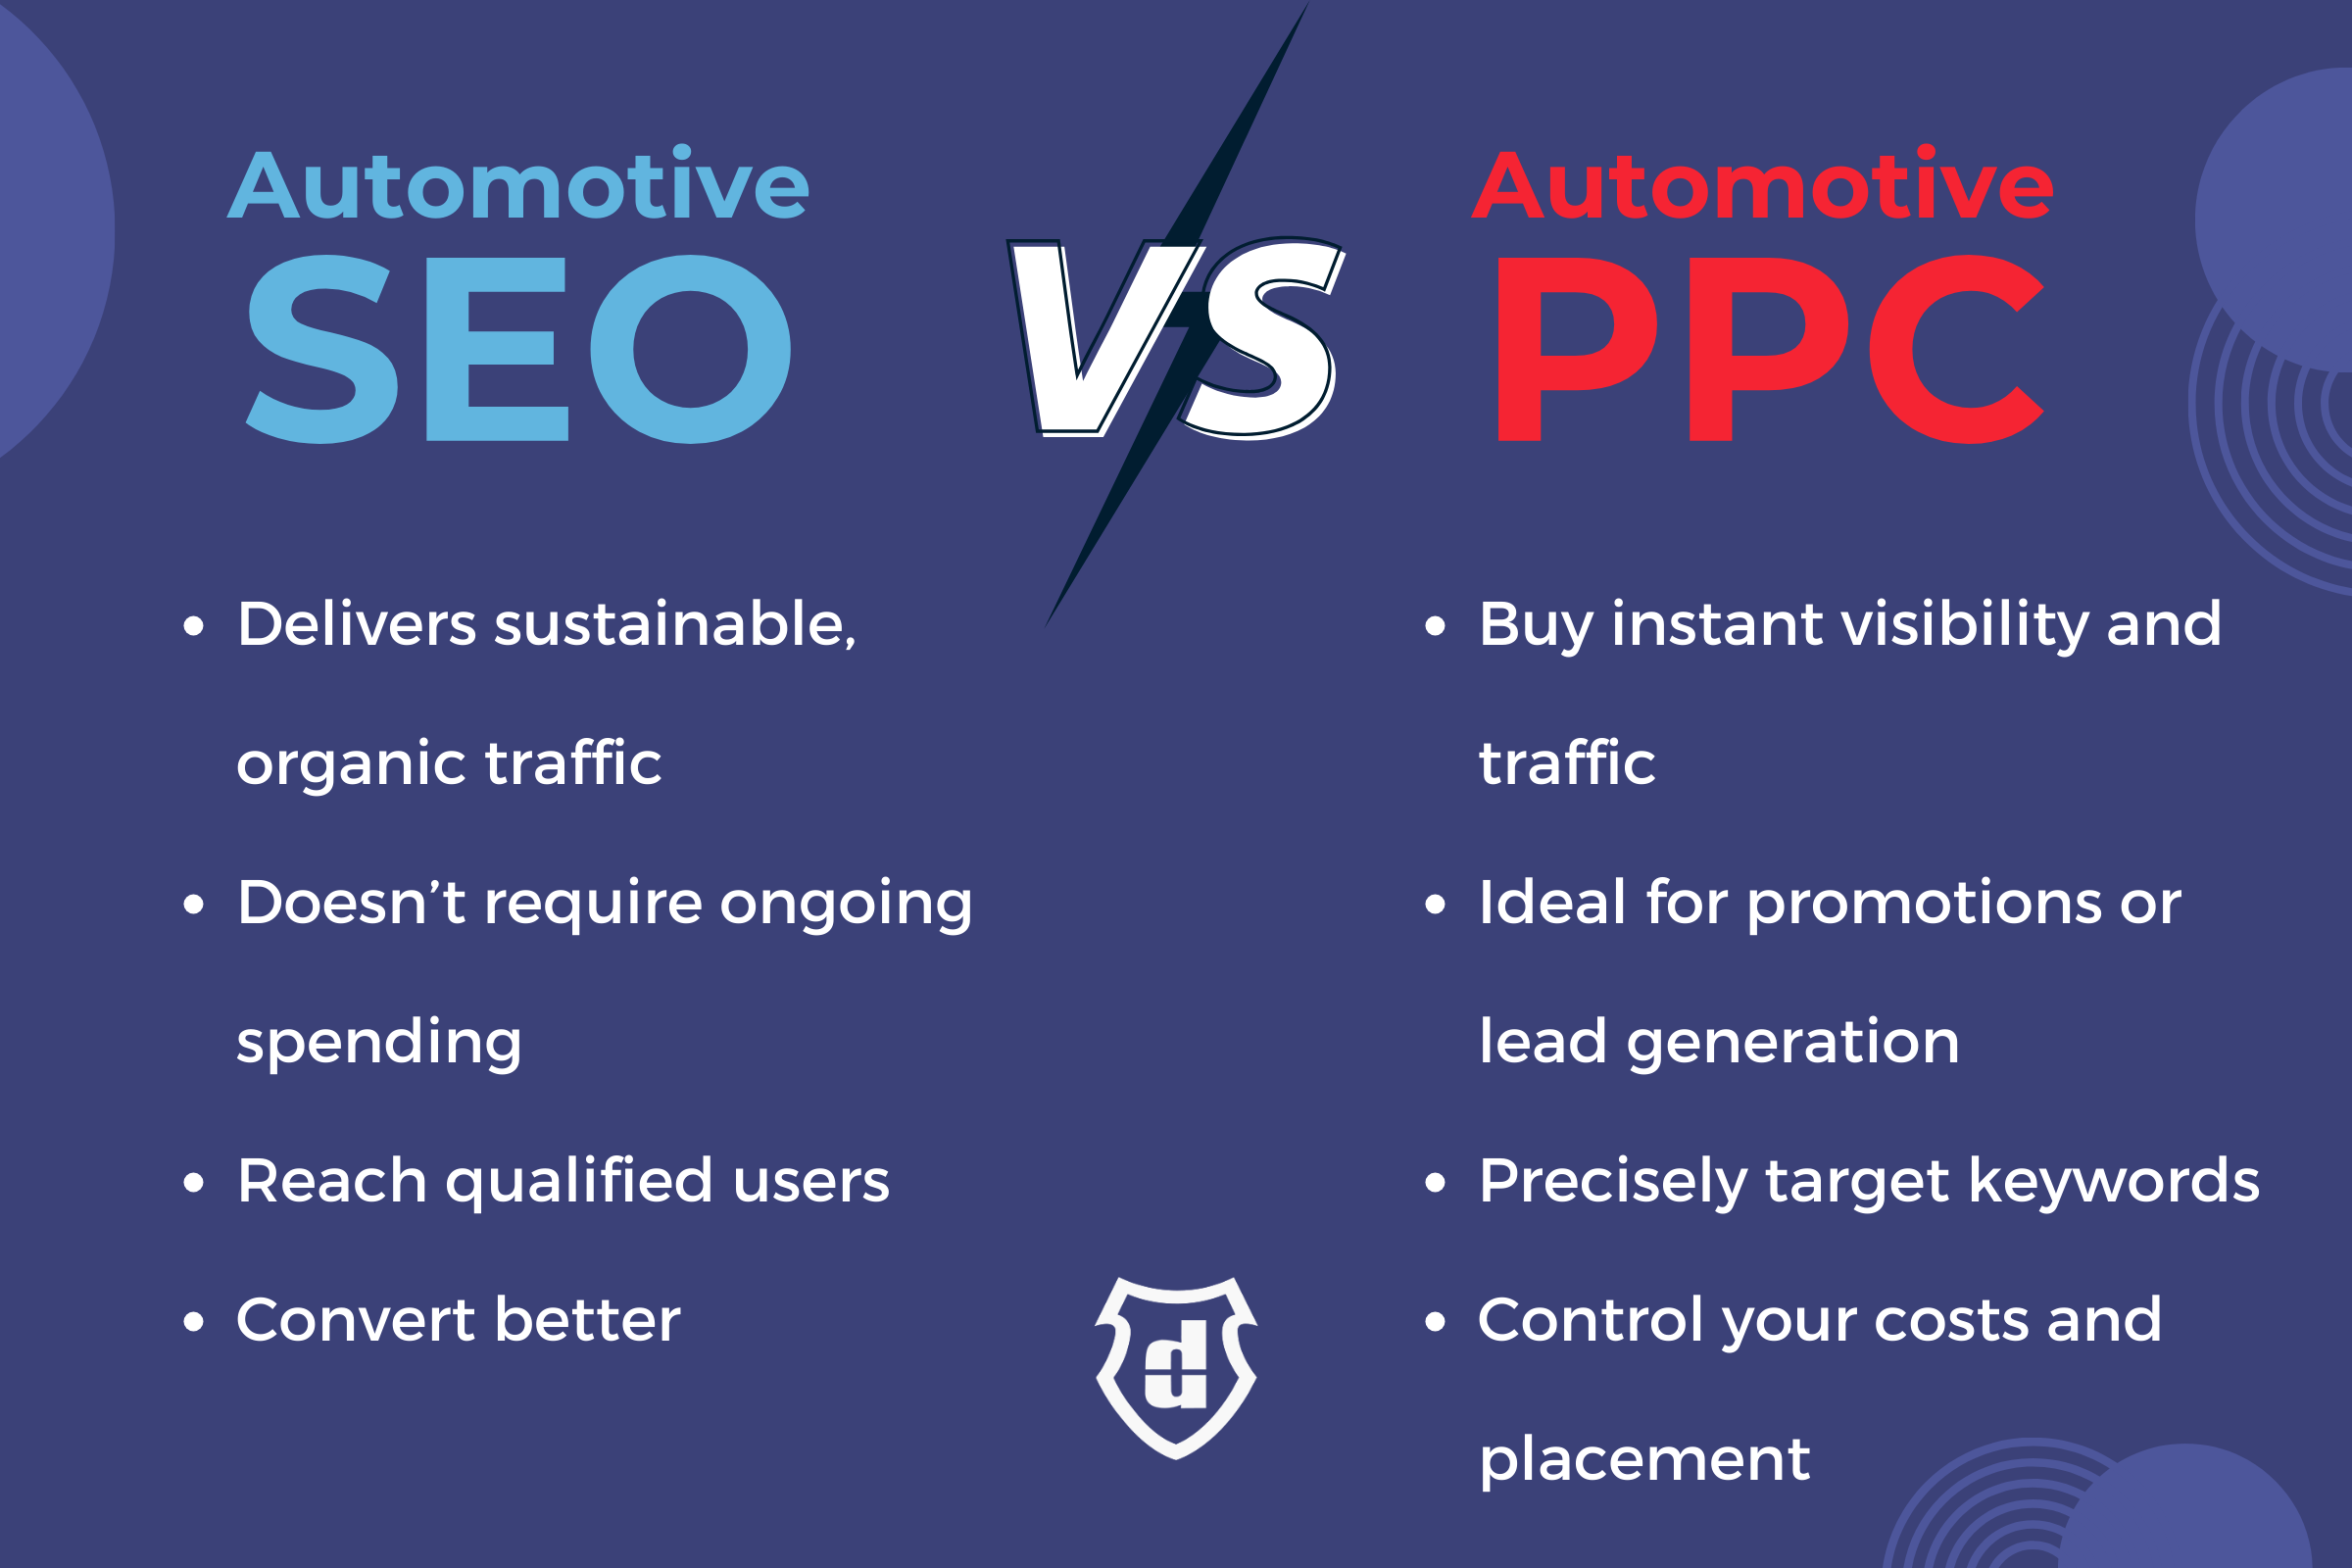 Differences between automotive SEO and automotive PPC